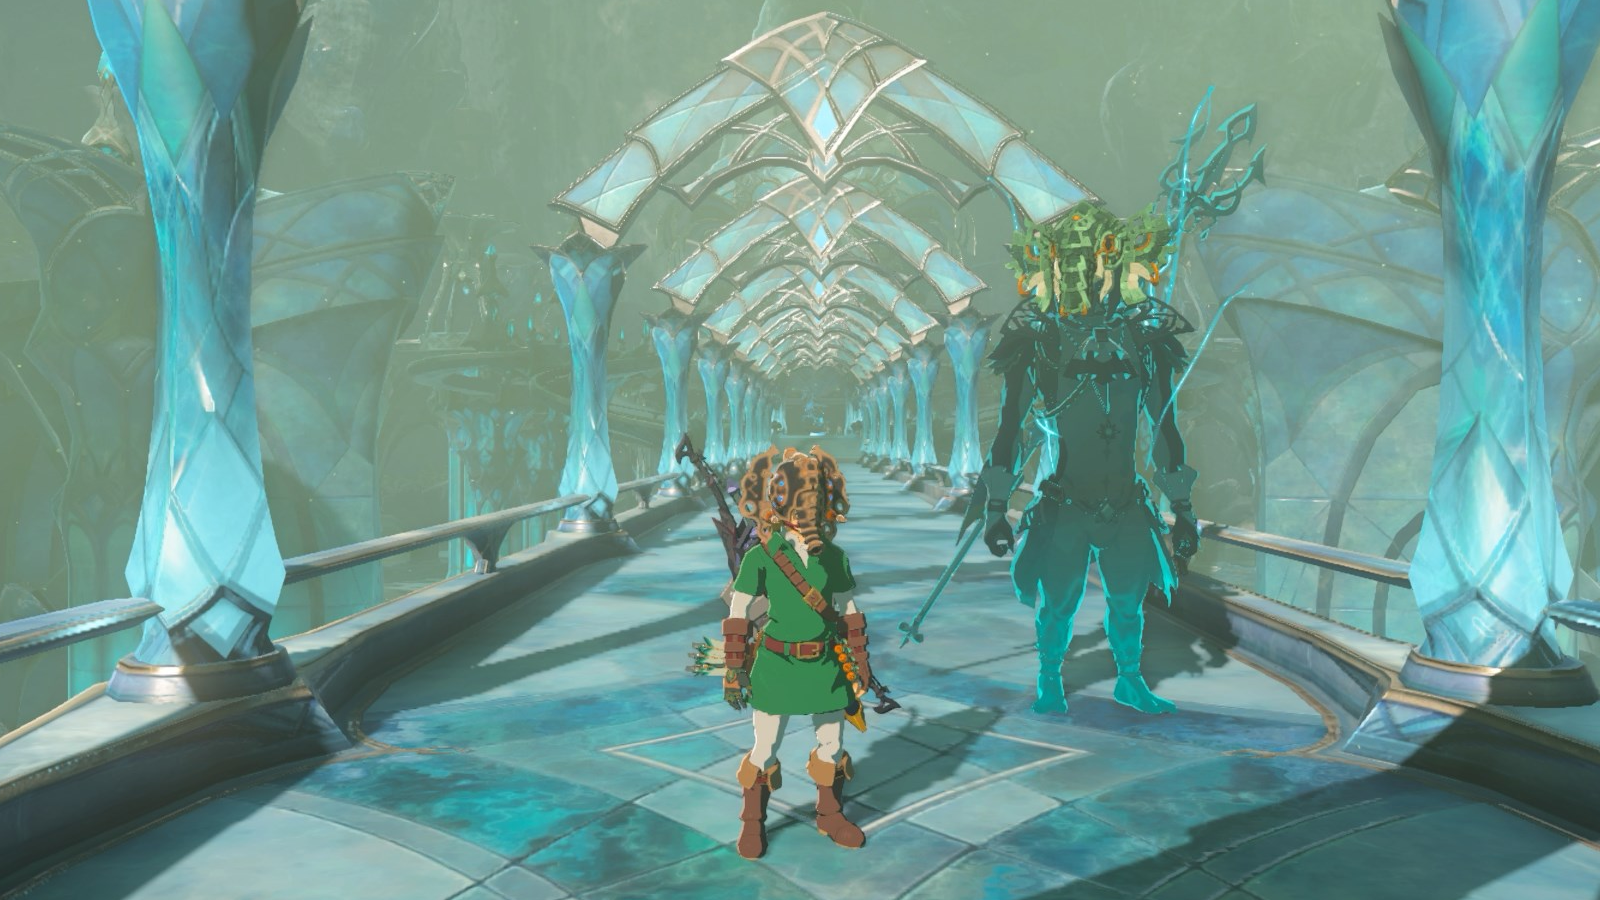 Link and Sidon’s avatar wearing the Vah Ruta Divine Helm on the bridge leading to the Zora’s Domain in The Legend of Zelda: Tears of the Kingdom.